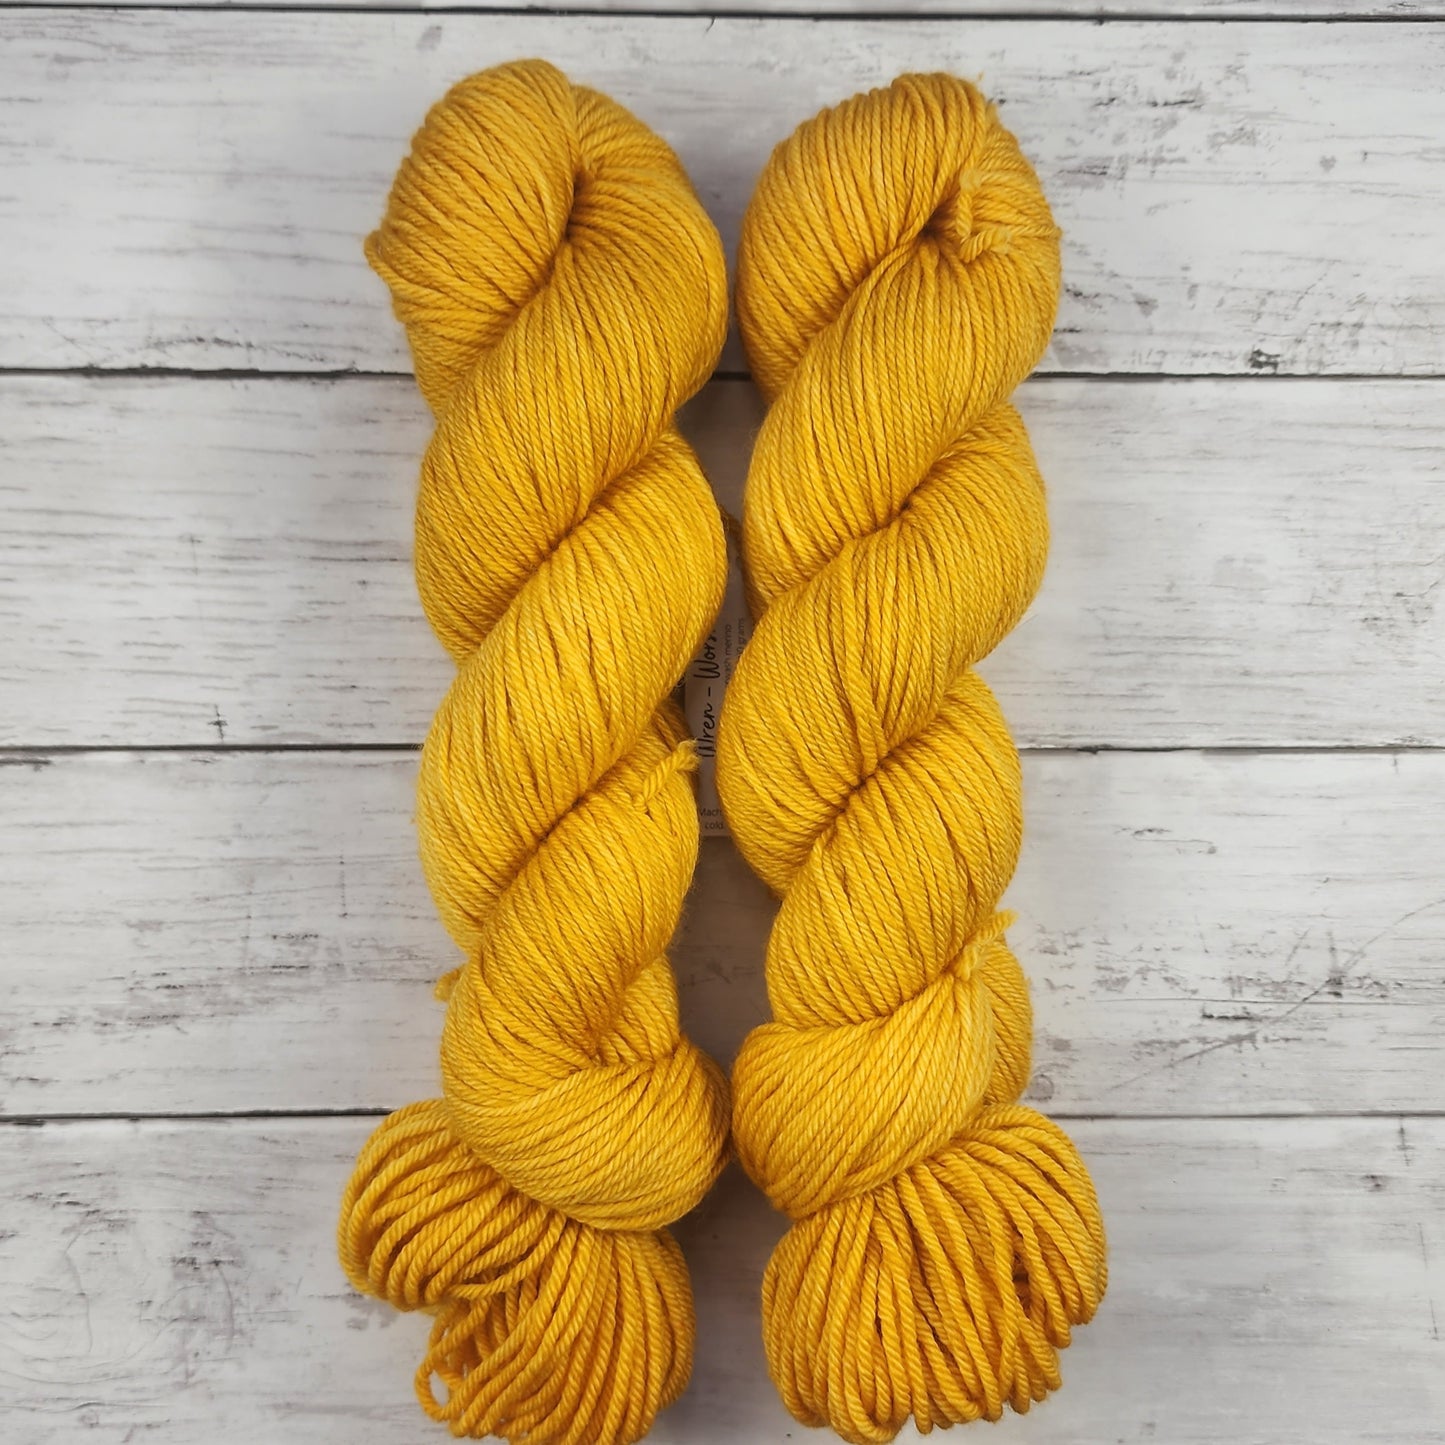 Wren Worsted - Affection 1.6